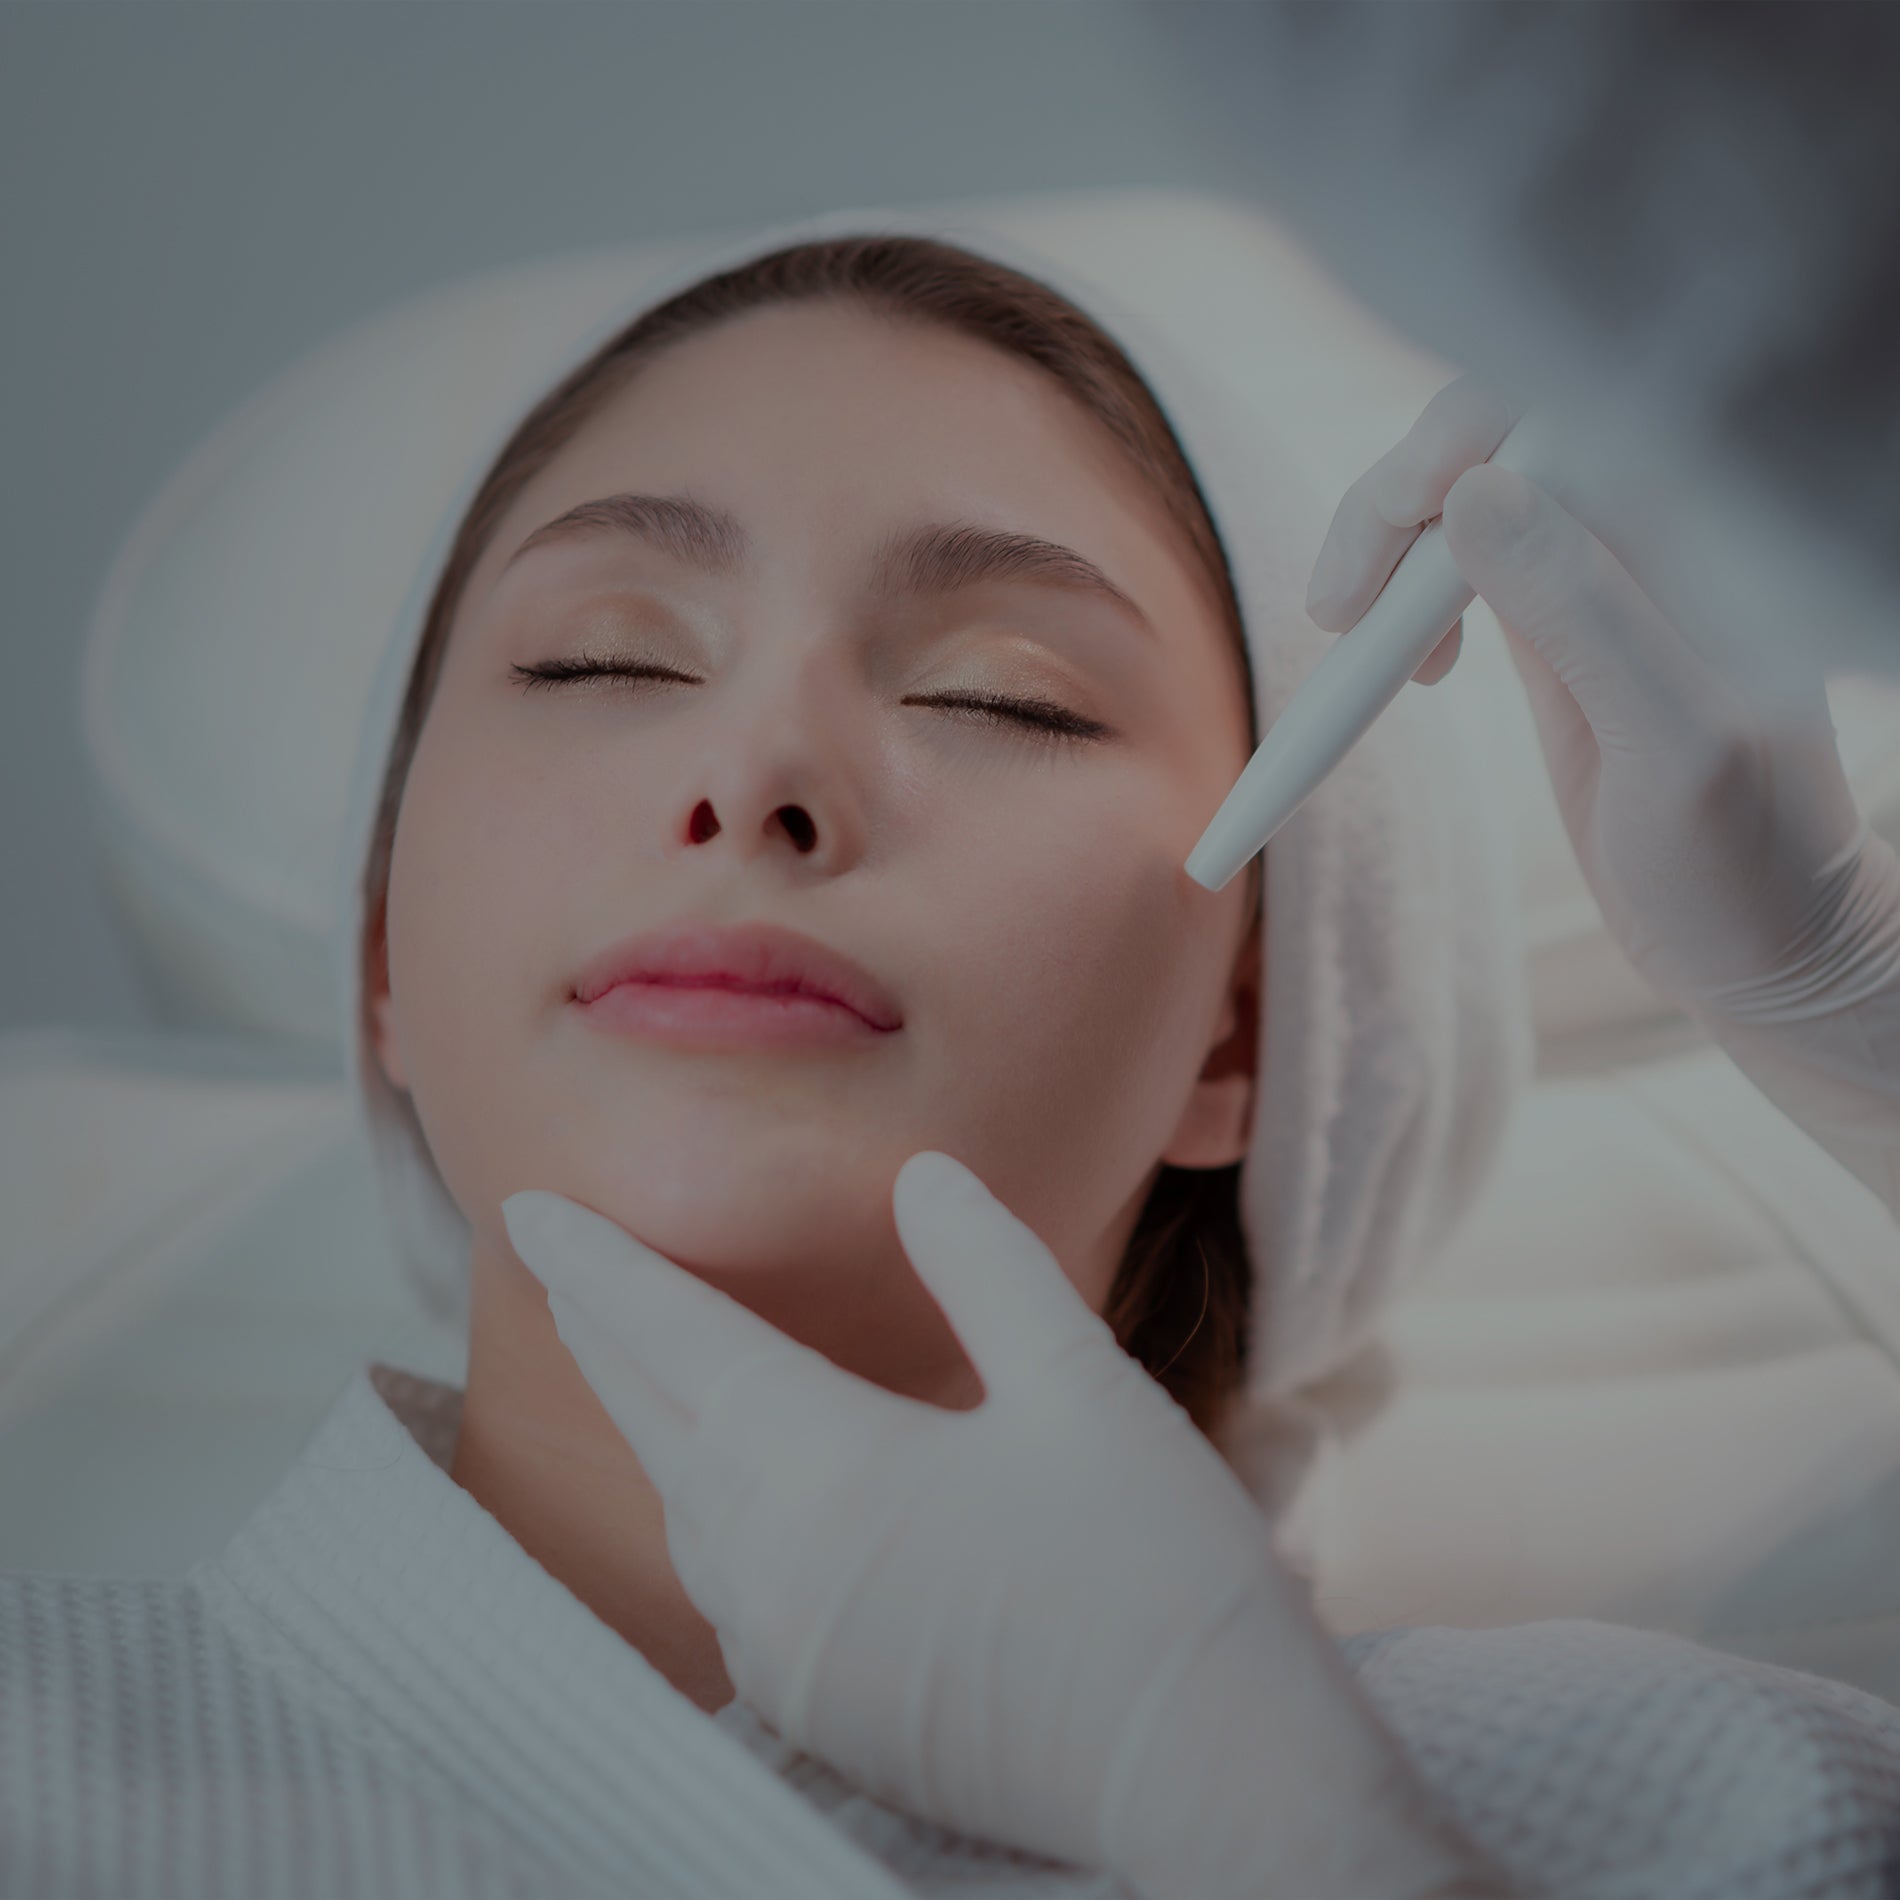 What Exactly Is Permanent Makeup?